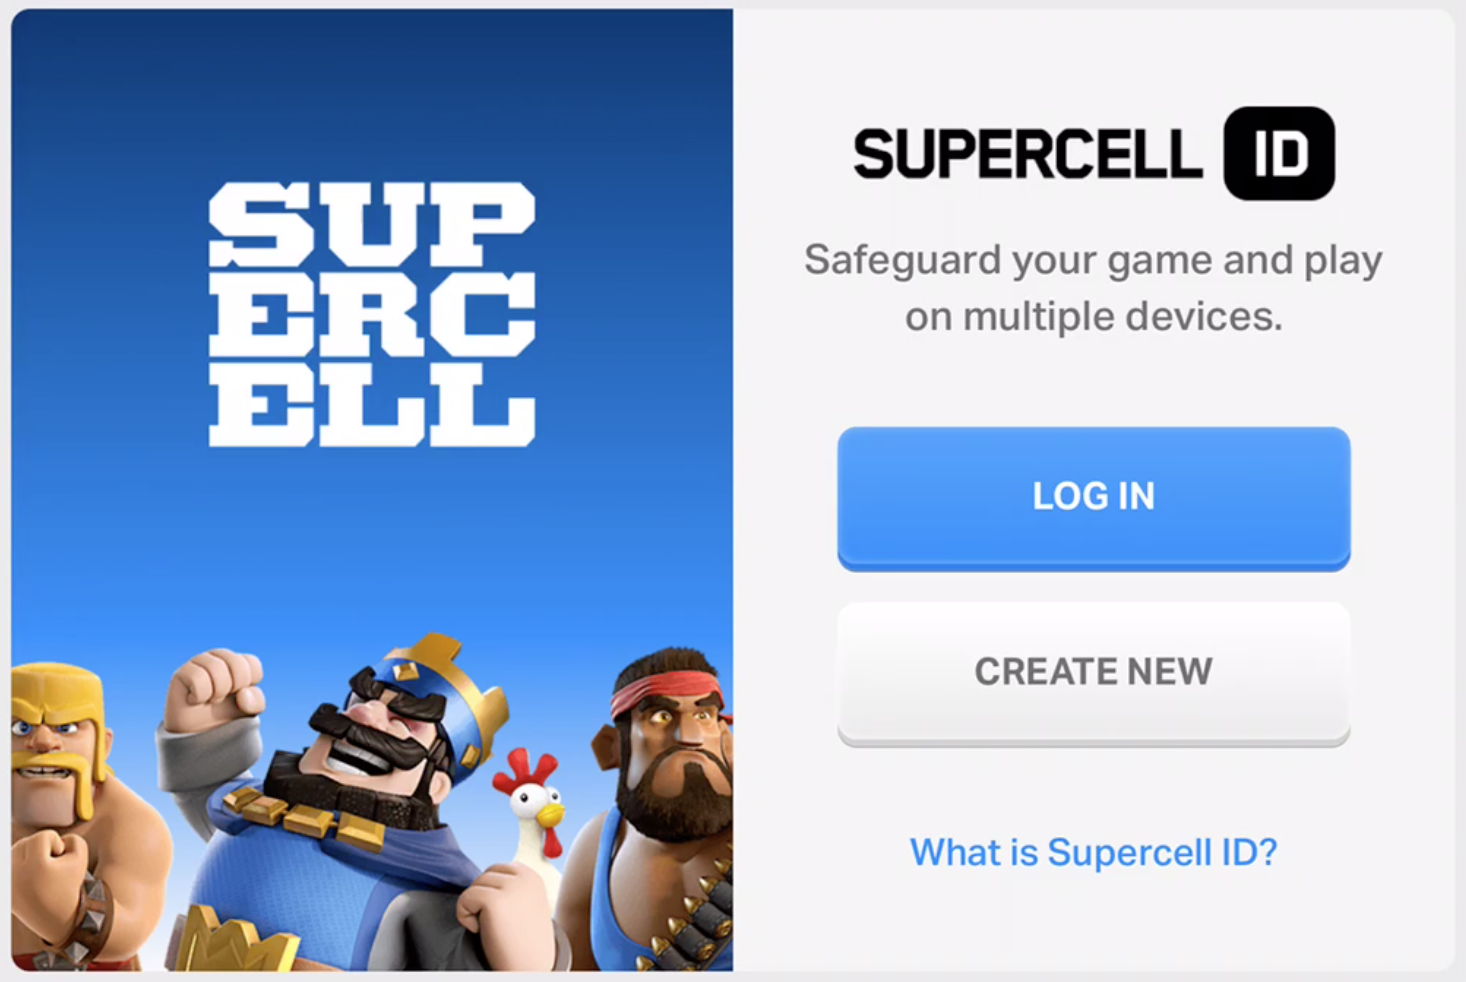 Supersell store. Суперселл ID. Картинки Supercell. Игры Supercell ID. Значок Supercell ID.